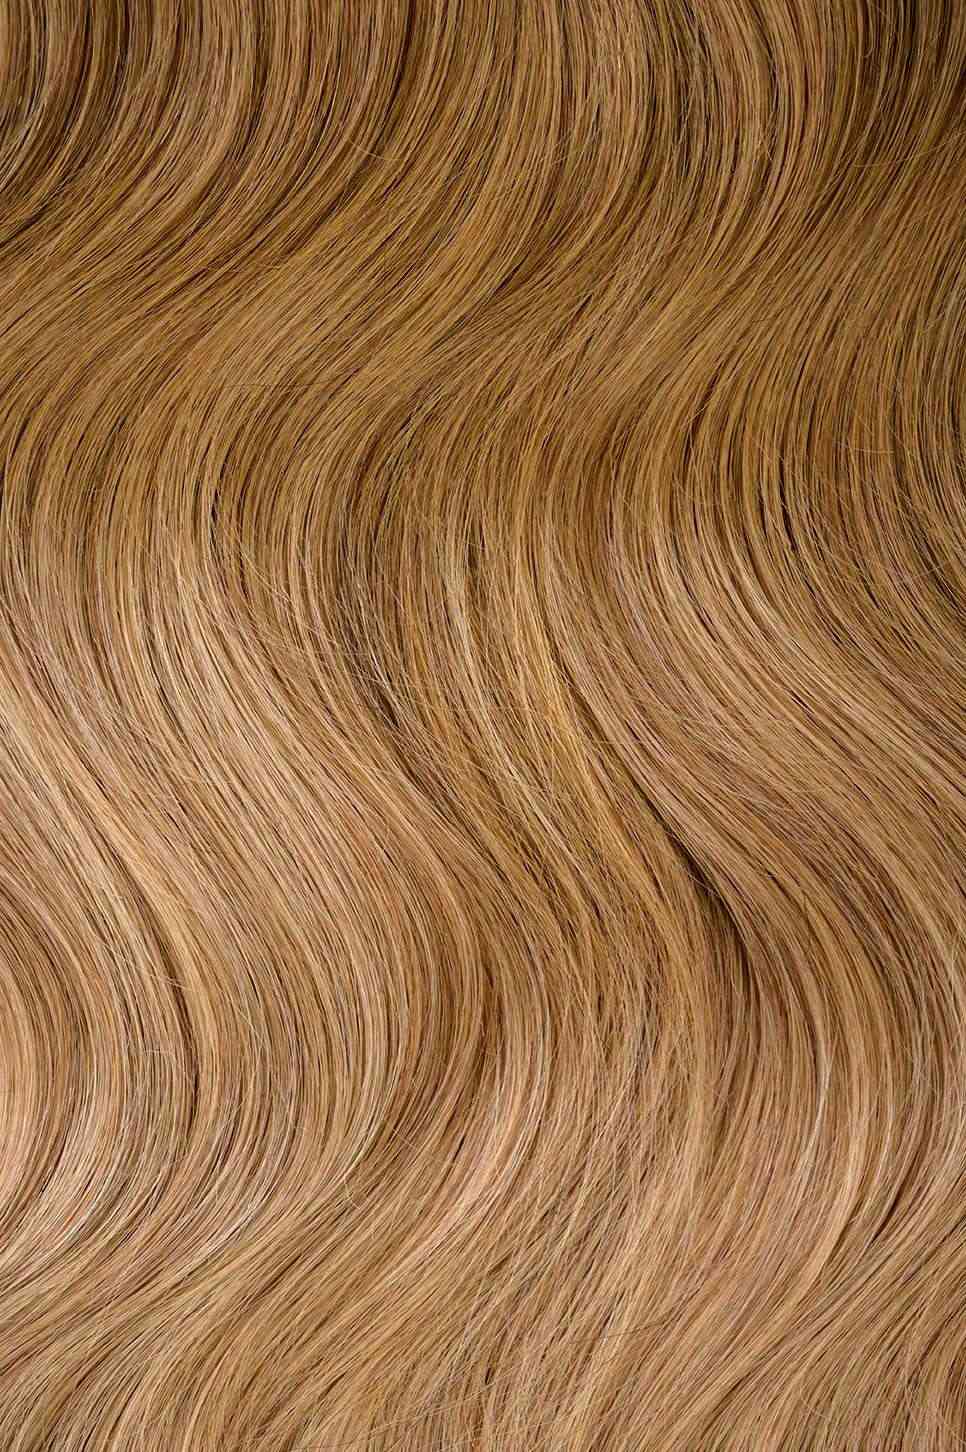 #Chestnut Brown Balayage Ultra Seamless Tape In Extensions